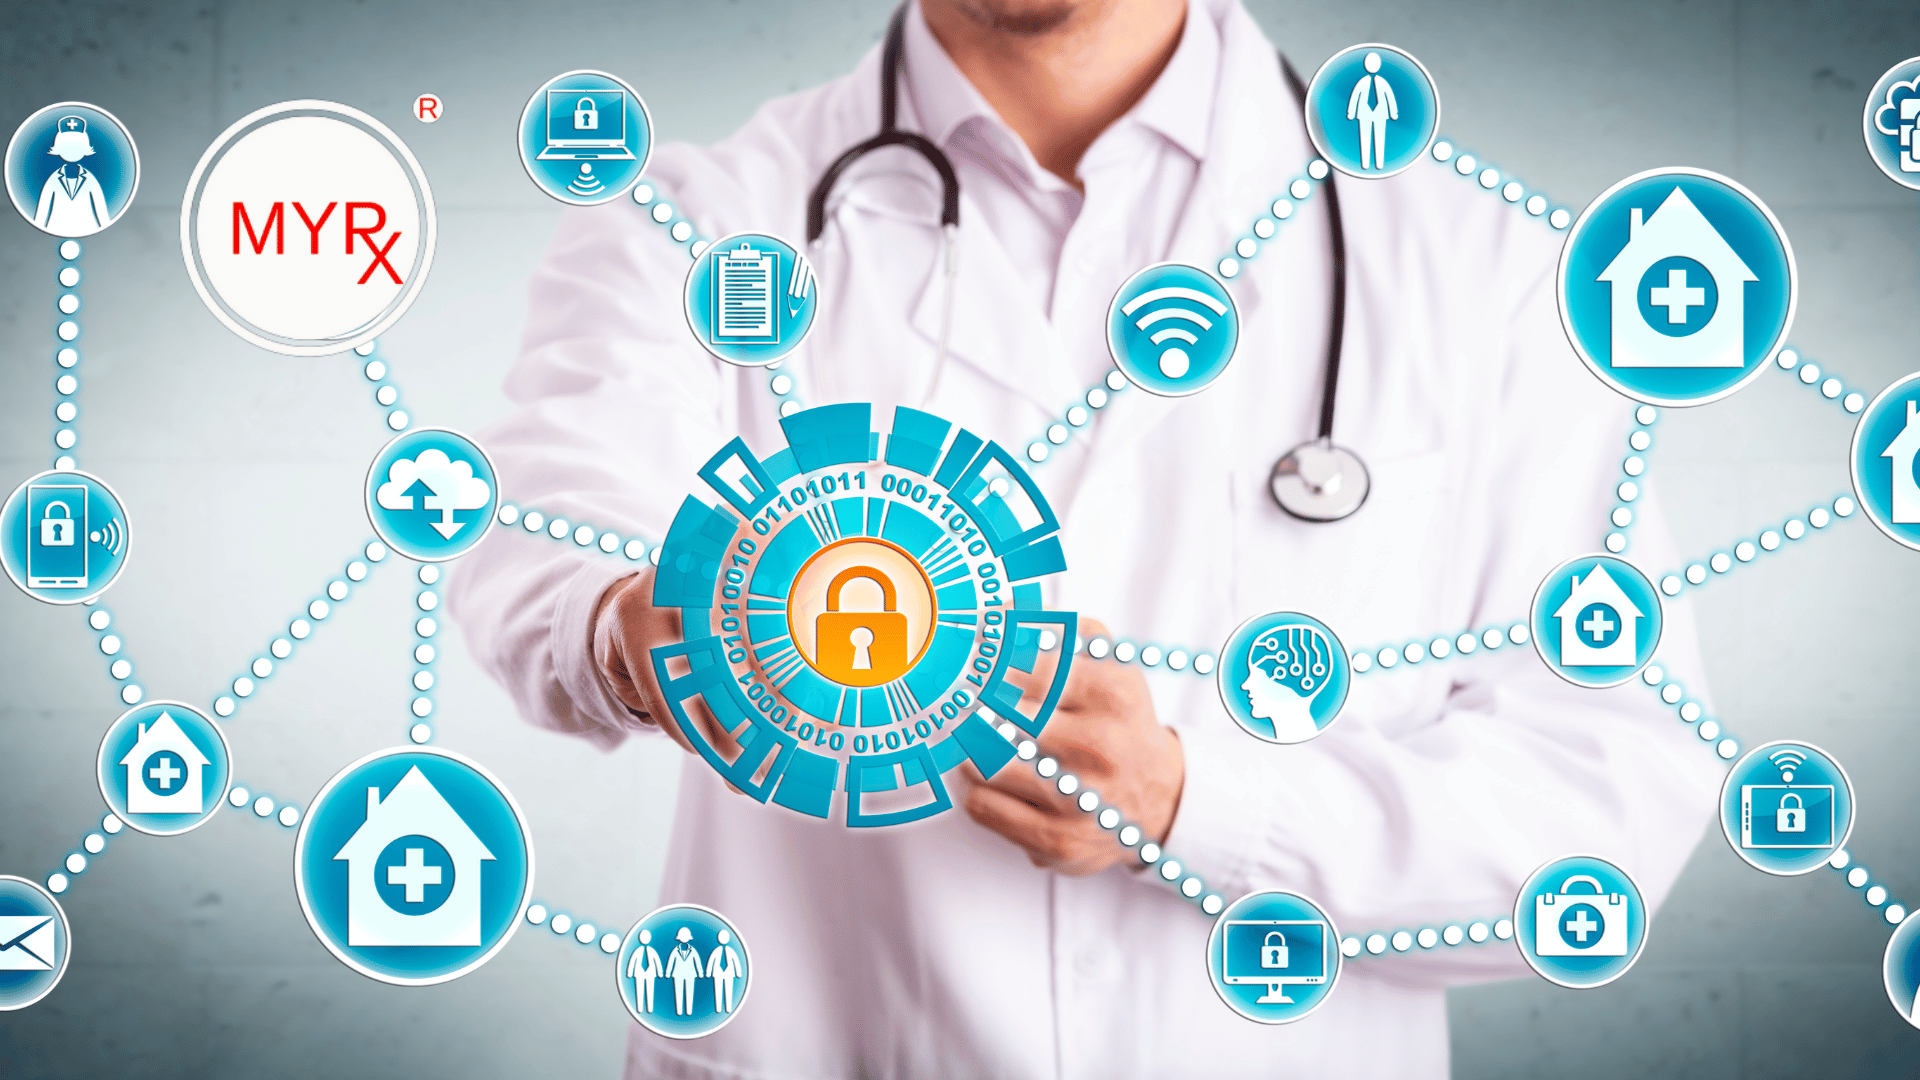 ensuring-data-security-and-privacy-in-EHR-systems-for-doctors